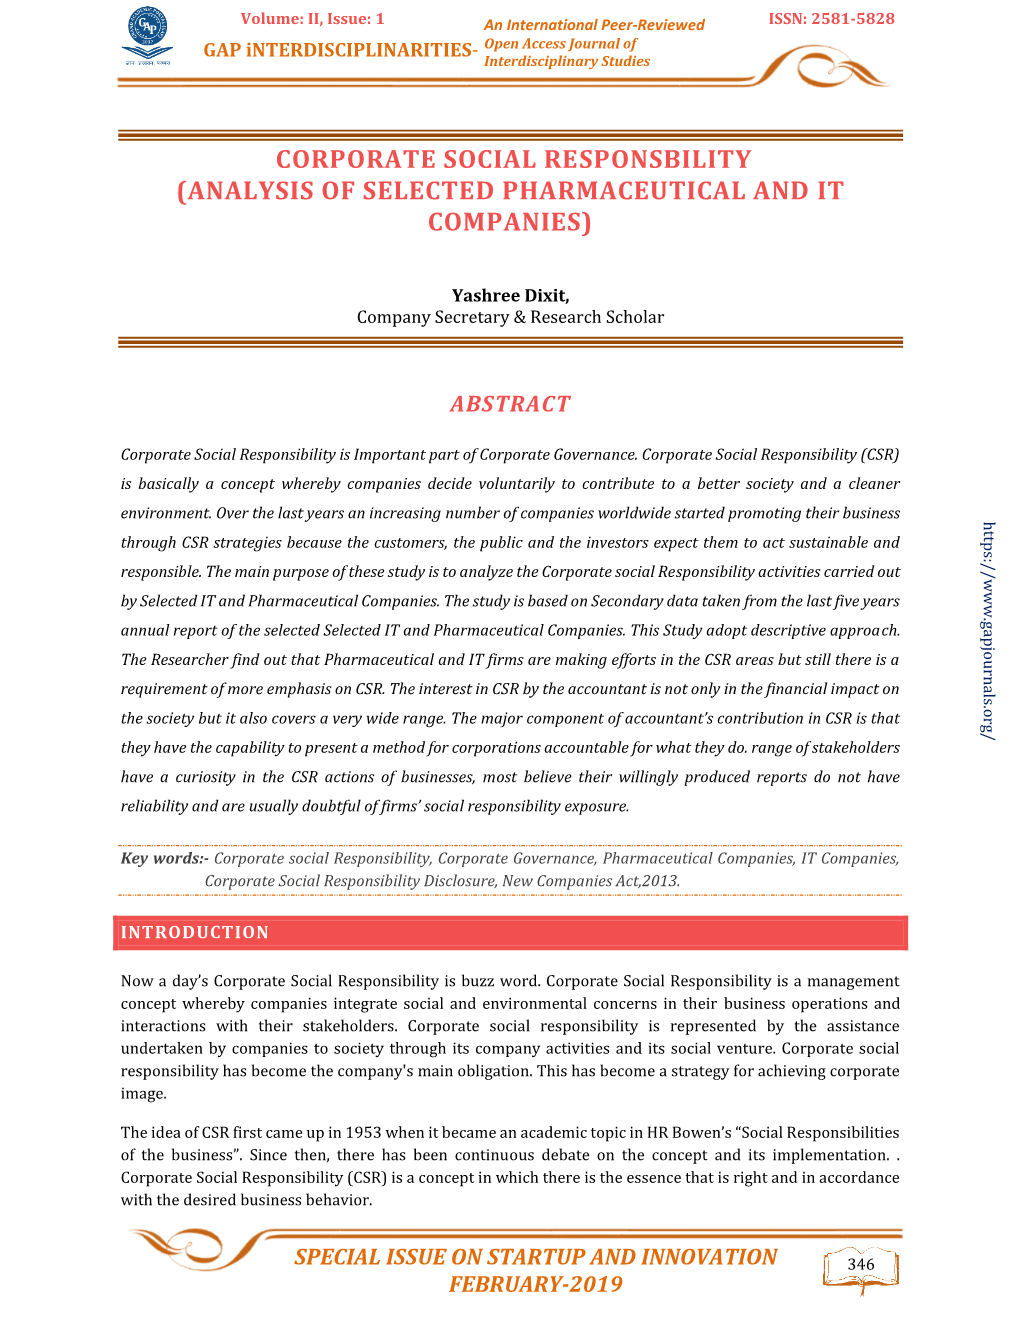 Corporate Social Responsbility (Analysis of Selected Pharmaceutical and It Companies)